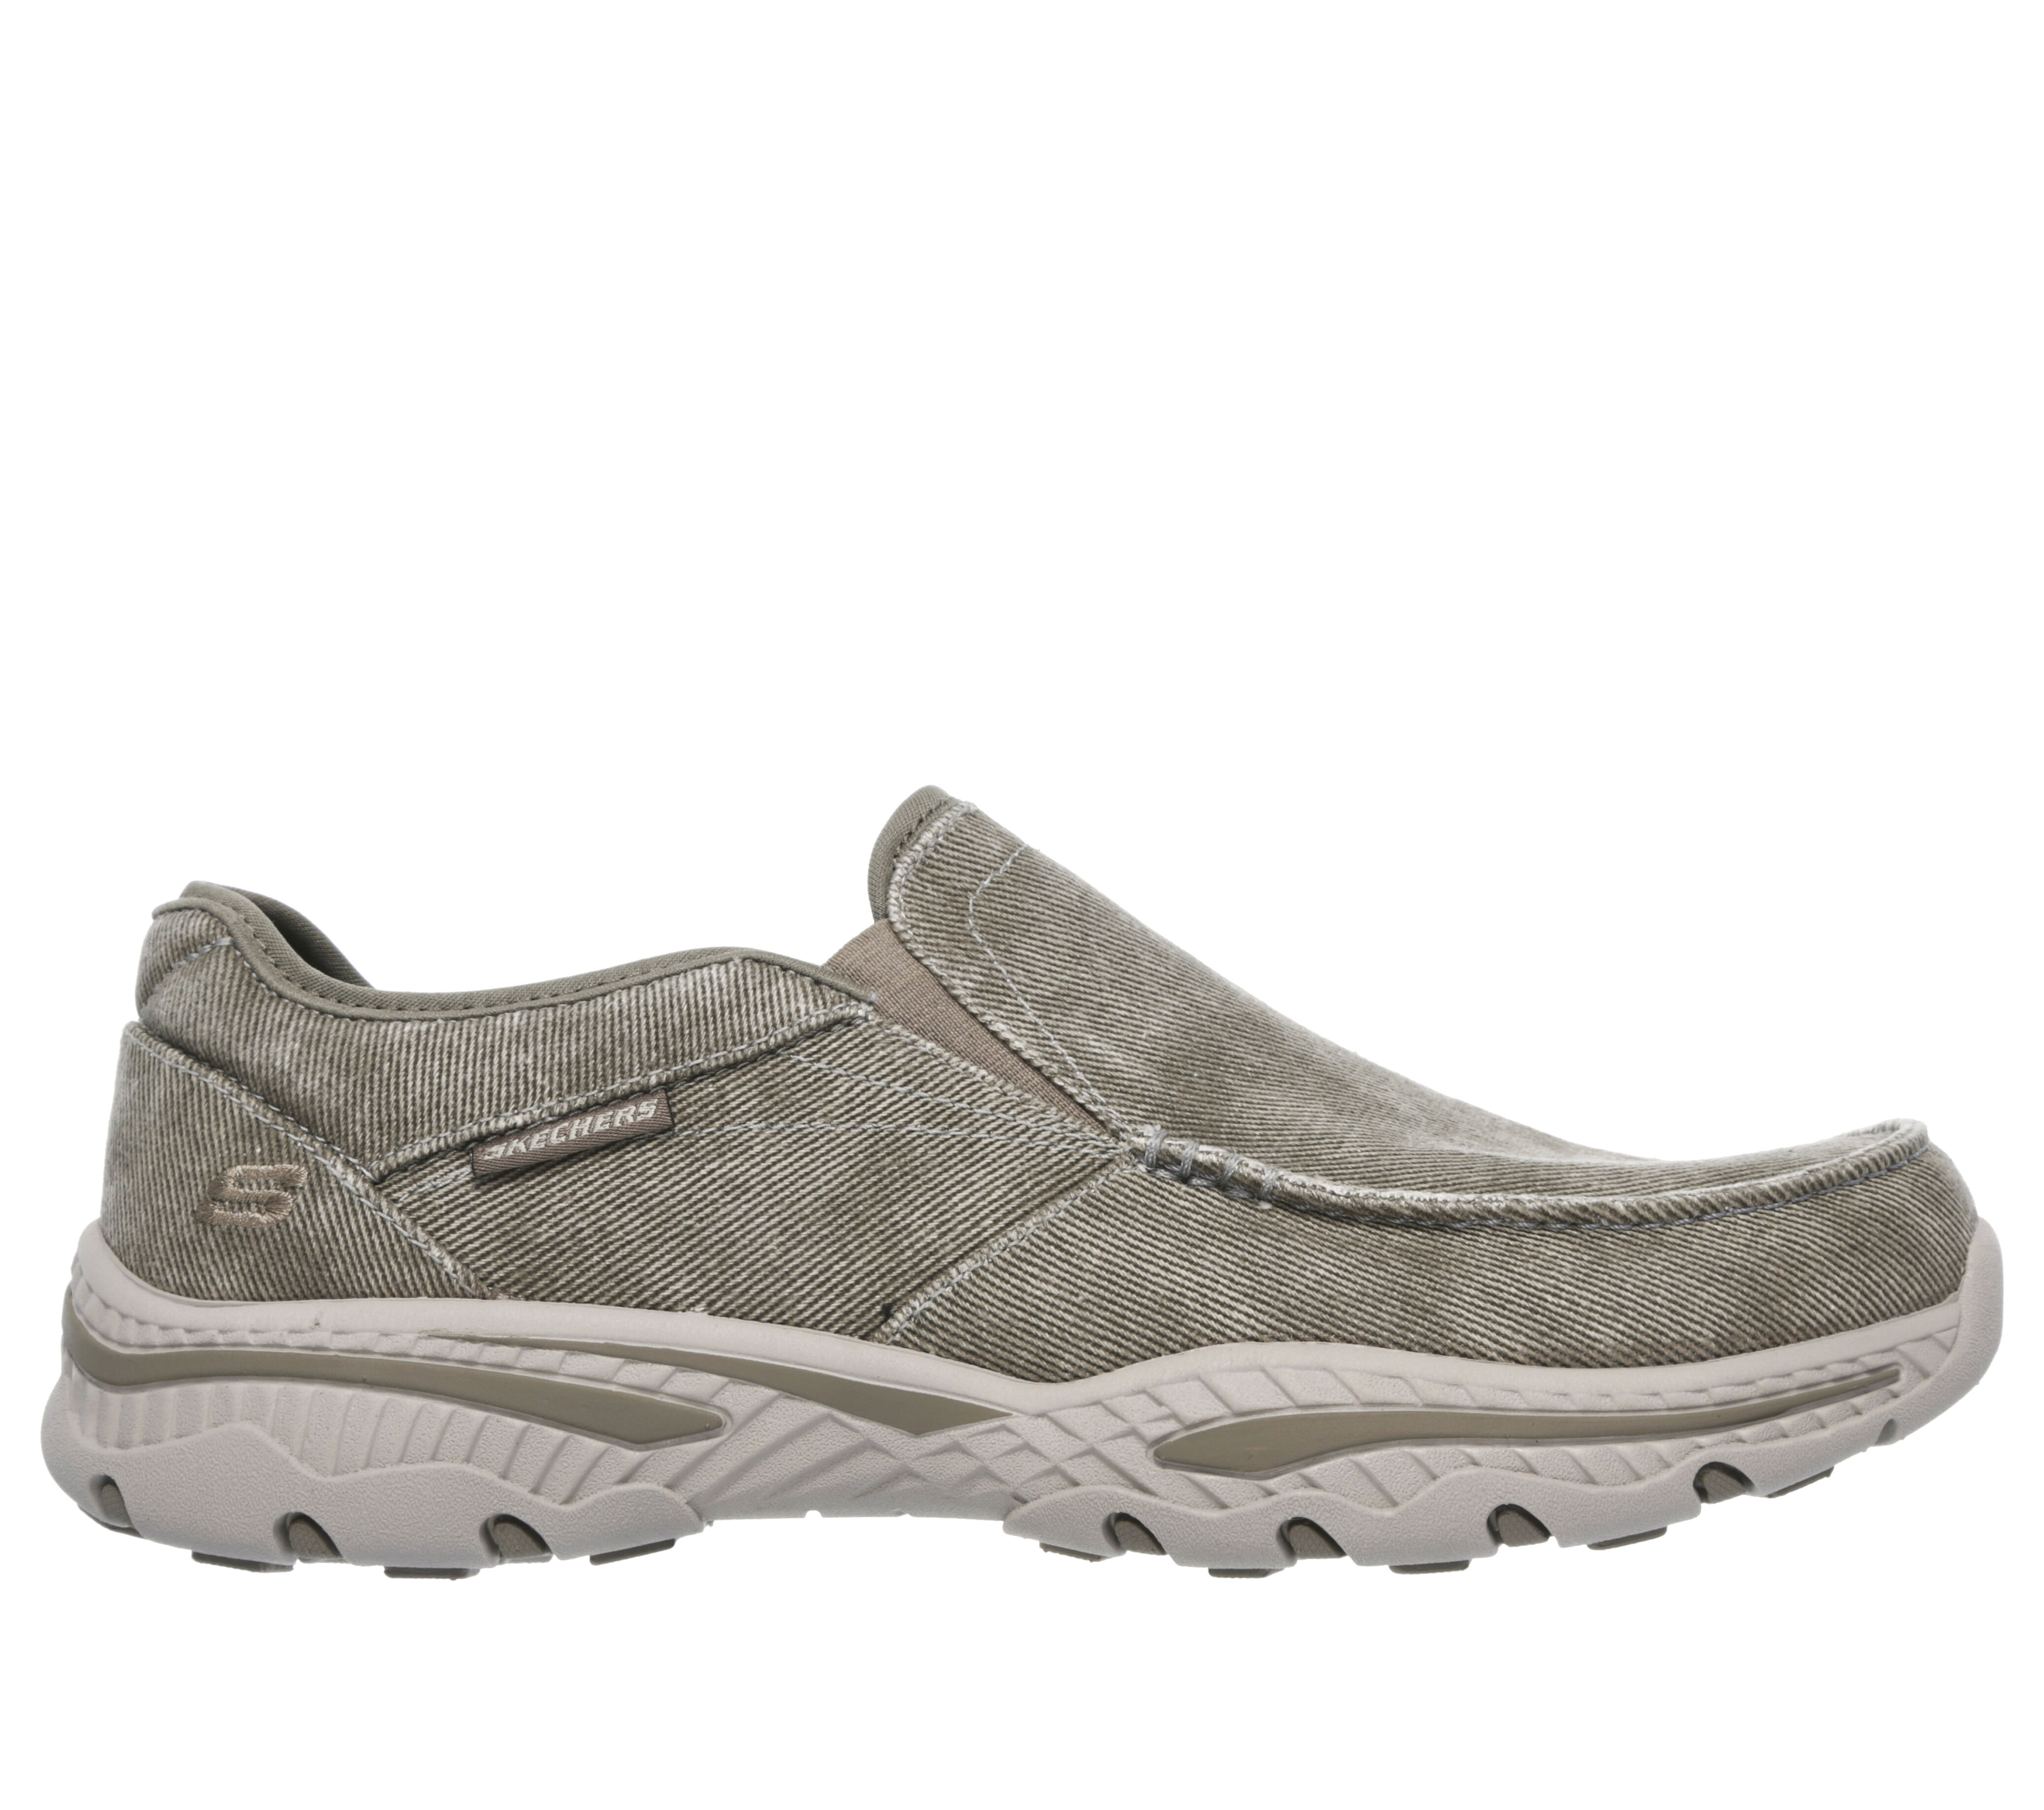 men's relaxed fit shoes